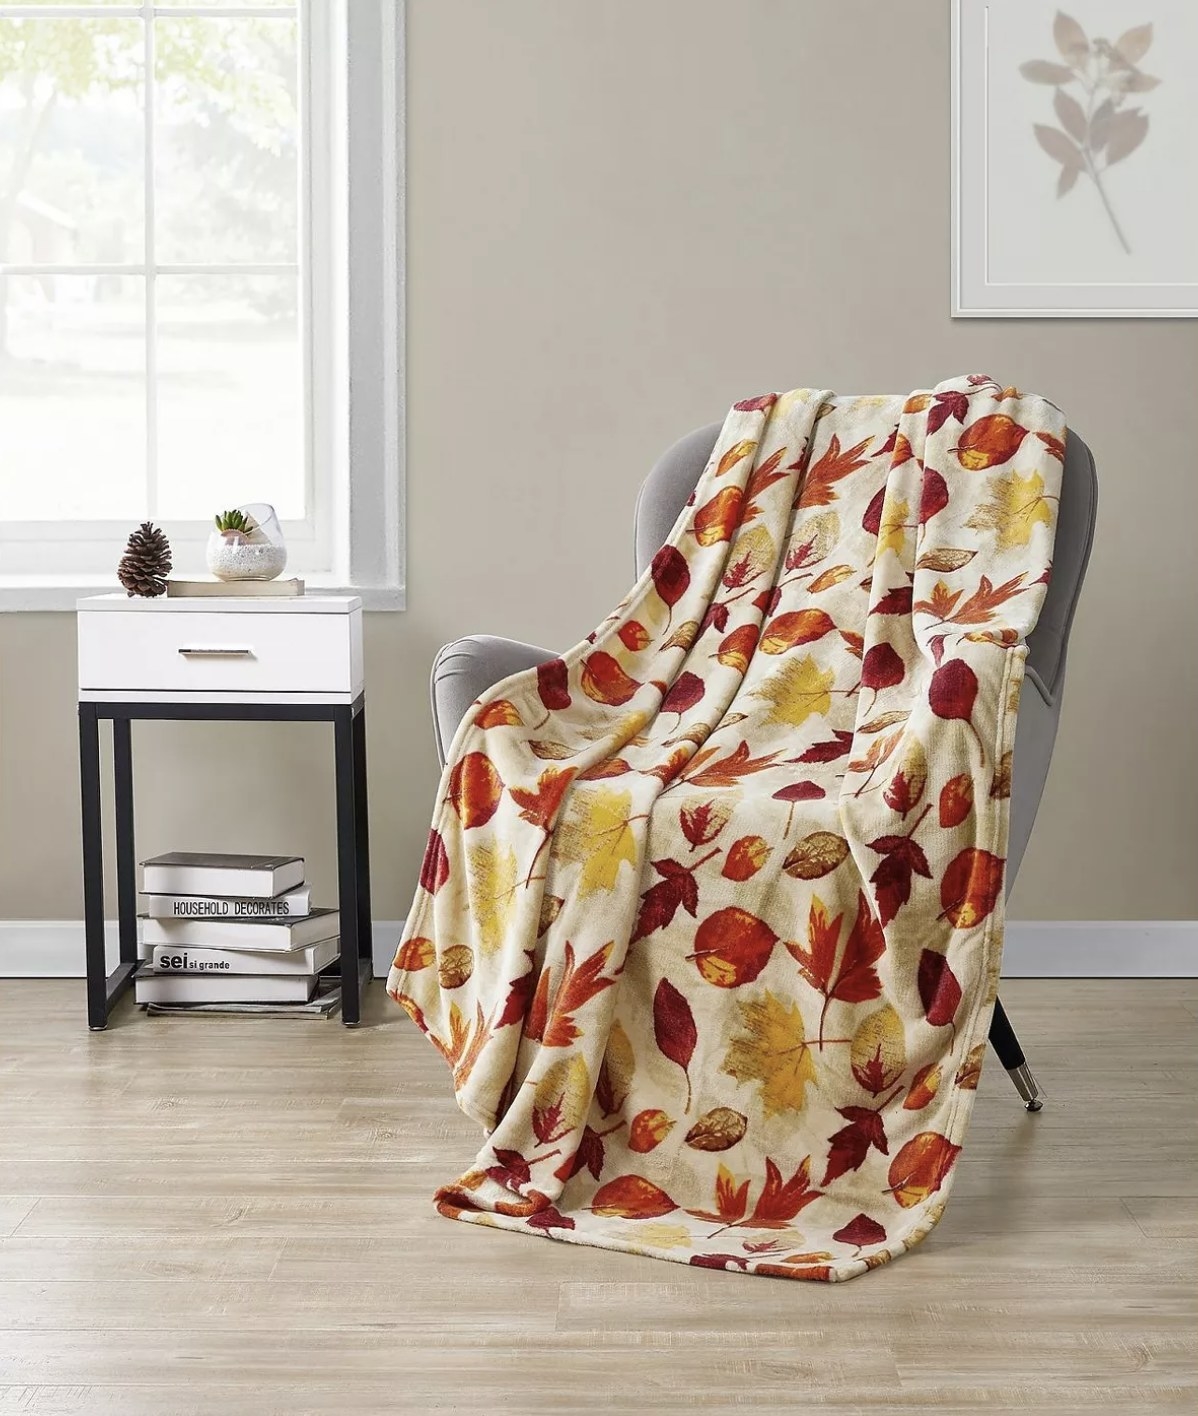 A throw blanket with autumn leaves on it on a chair in a living space